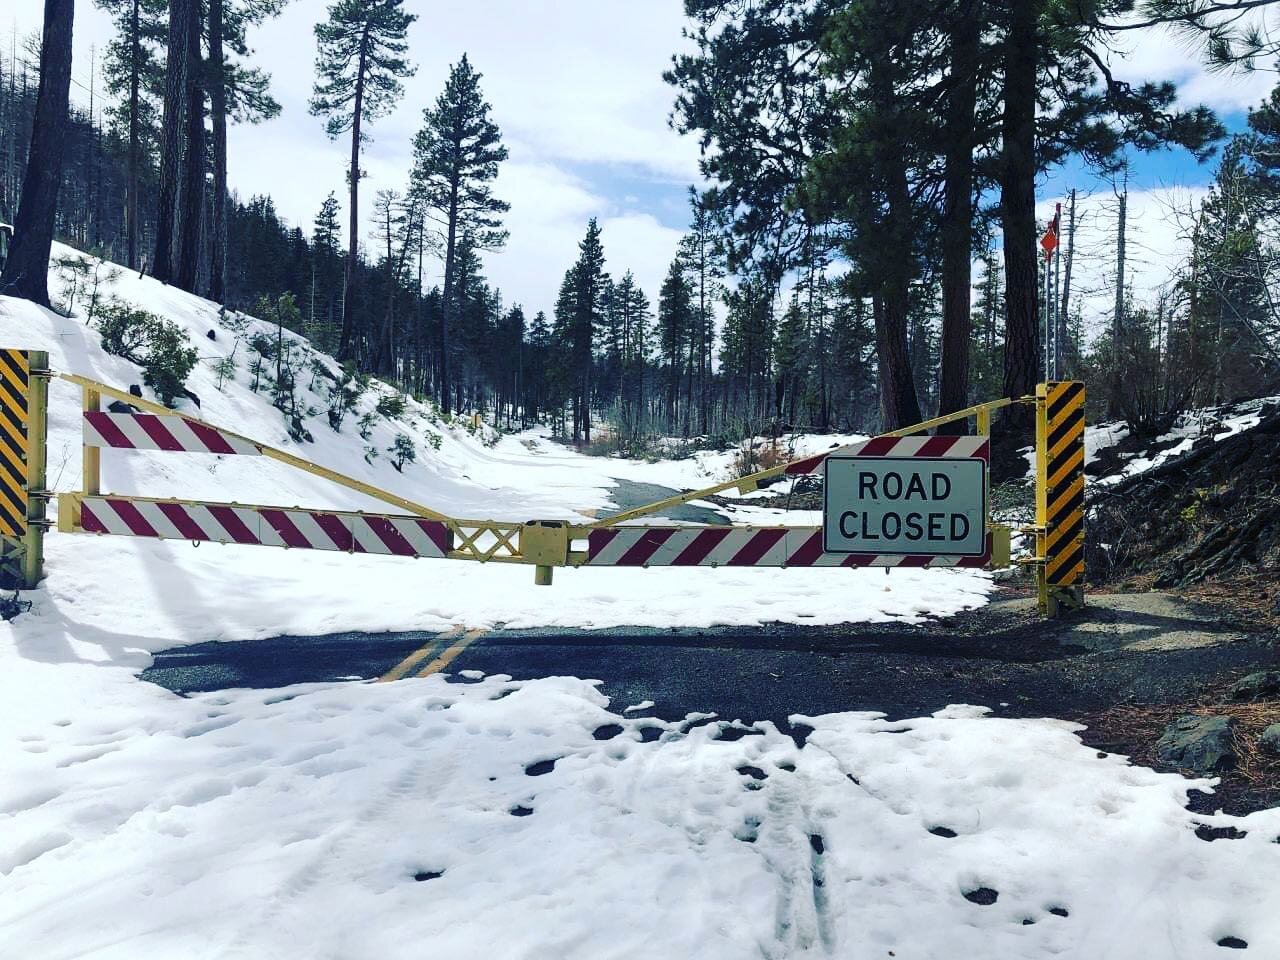 MCKENZIE PASS UPDATE

Want to know the status of the McKenzie Pass road to ride it before cars drive through? Check out EuroSports Website for updates: http://eurosports.us/mckenzie_pass_update#Next
As of 4/23 the snow accumulation had come back due 